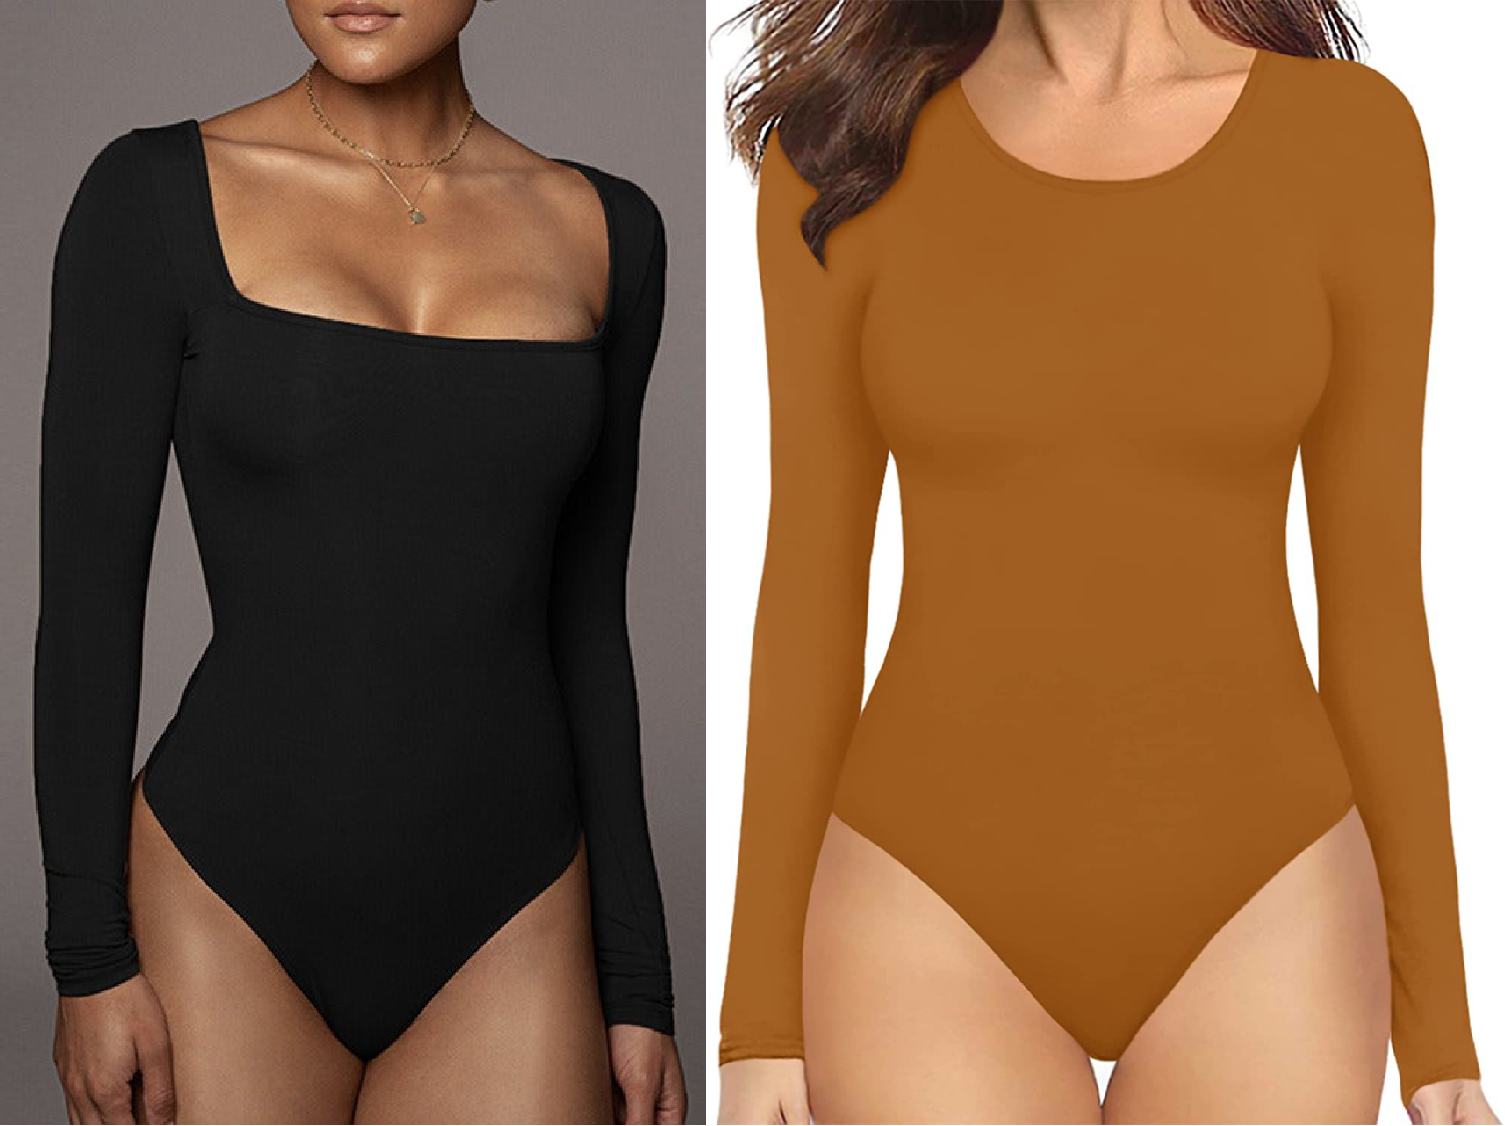 the difference in my waist from this shapewear bodysuit is UNREAL!! Ru